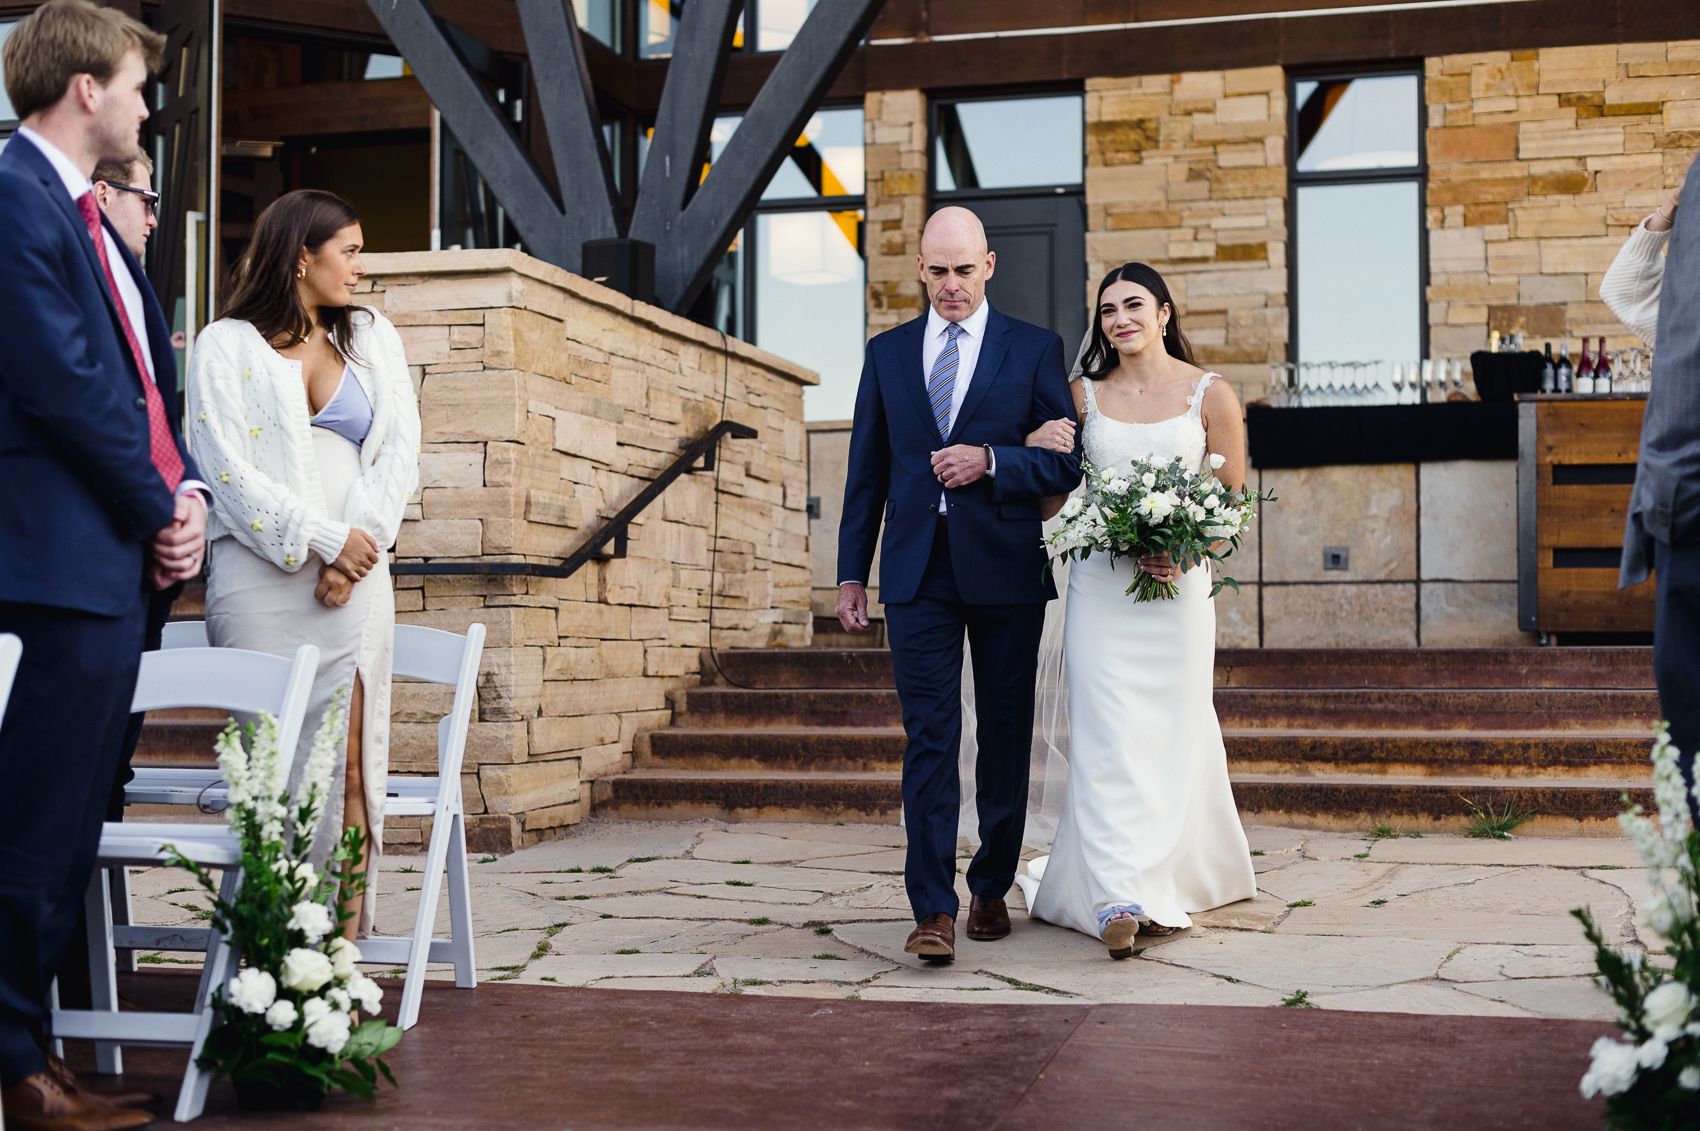 The 10th Vail Wedding